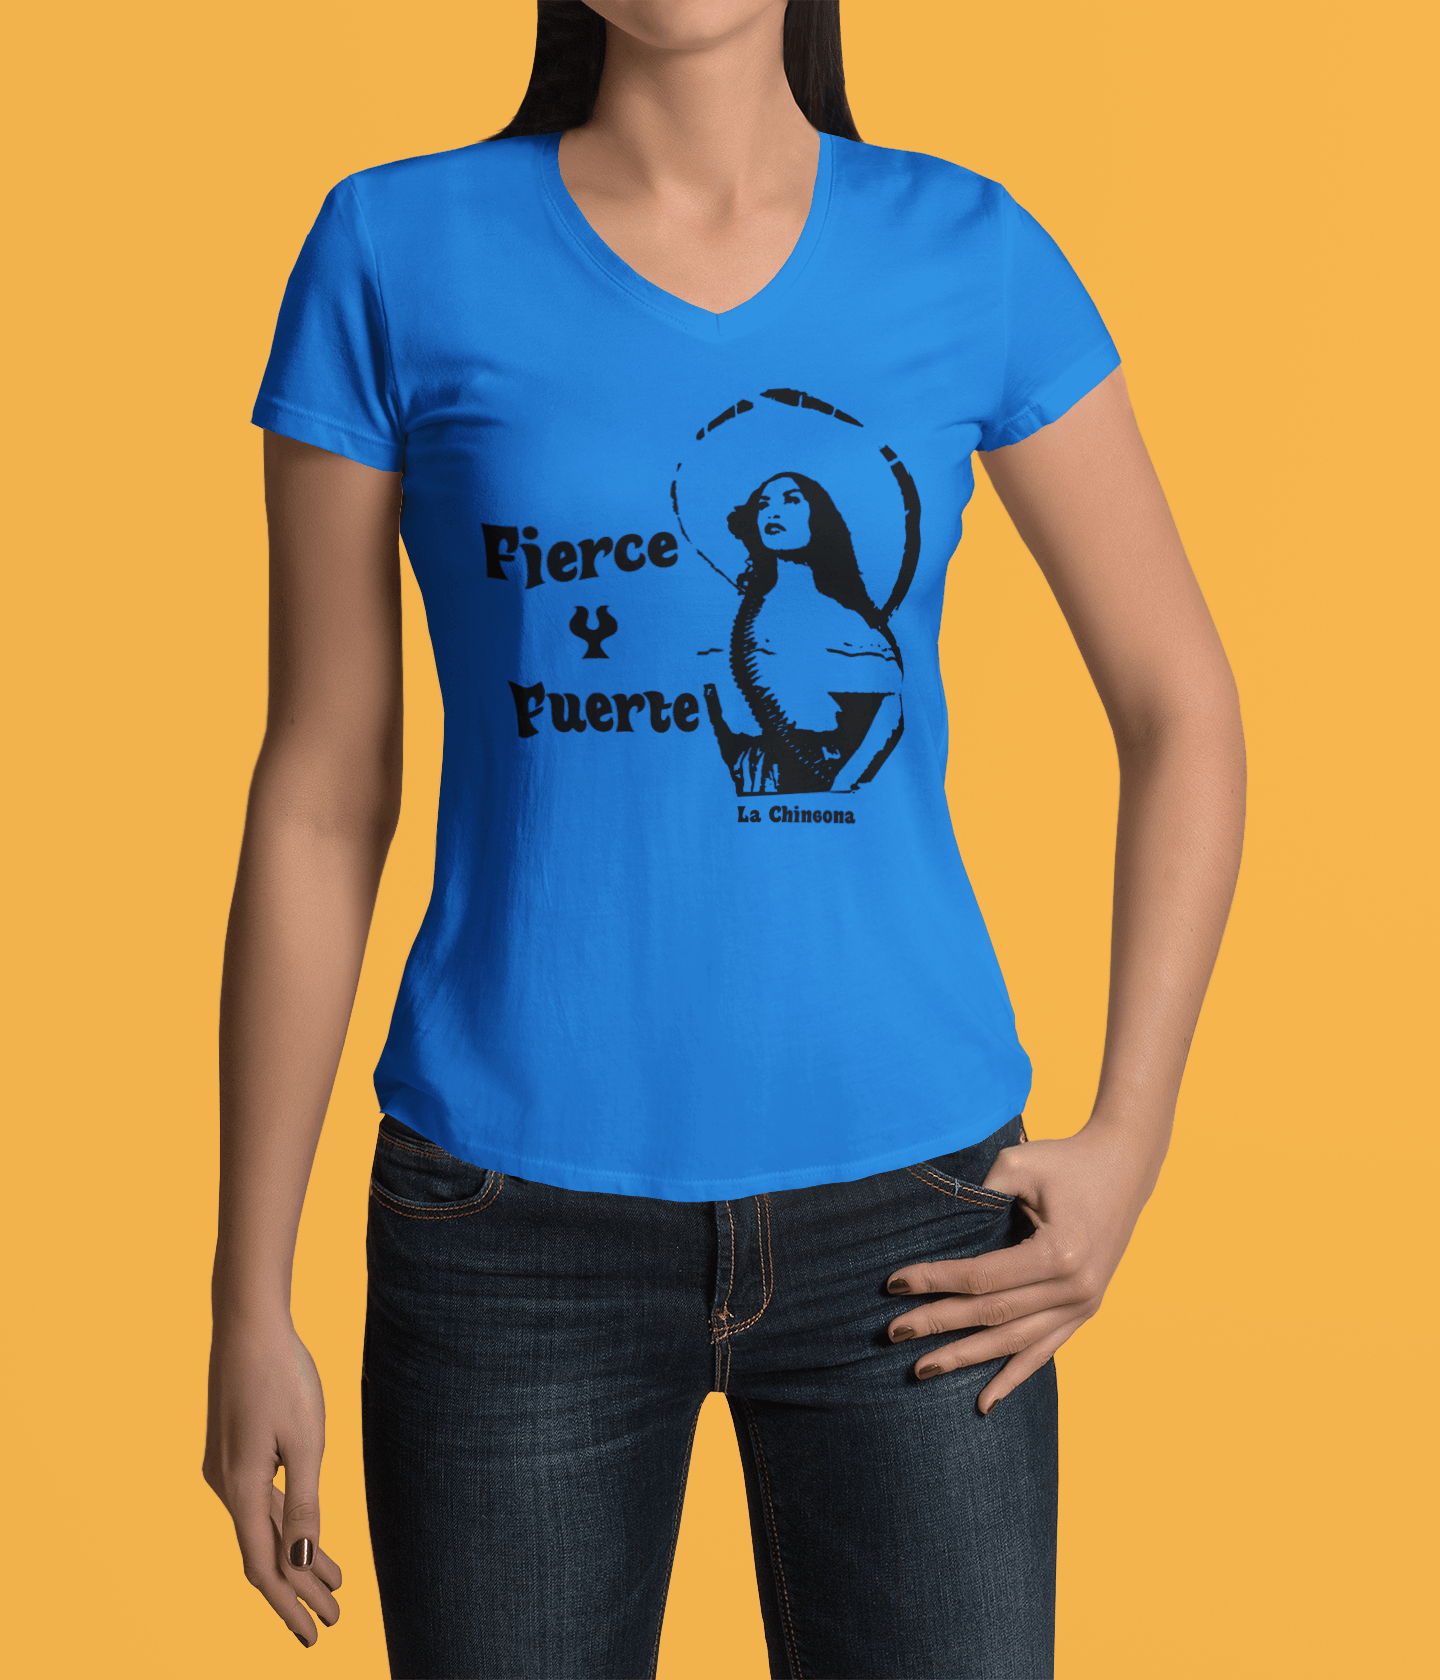 Blue V-neck t-shirt with the text, "Fierce Y Fuerte La Chingona" in black ink and a Mexican woman with a sombreo and bullet strap also in black ink. This sassy tee comes in sizes small thru 3XL. It is available at www.sanchezhere.com